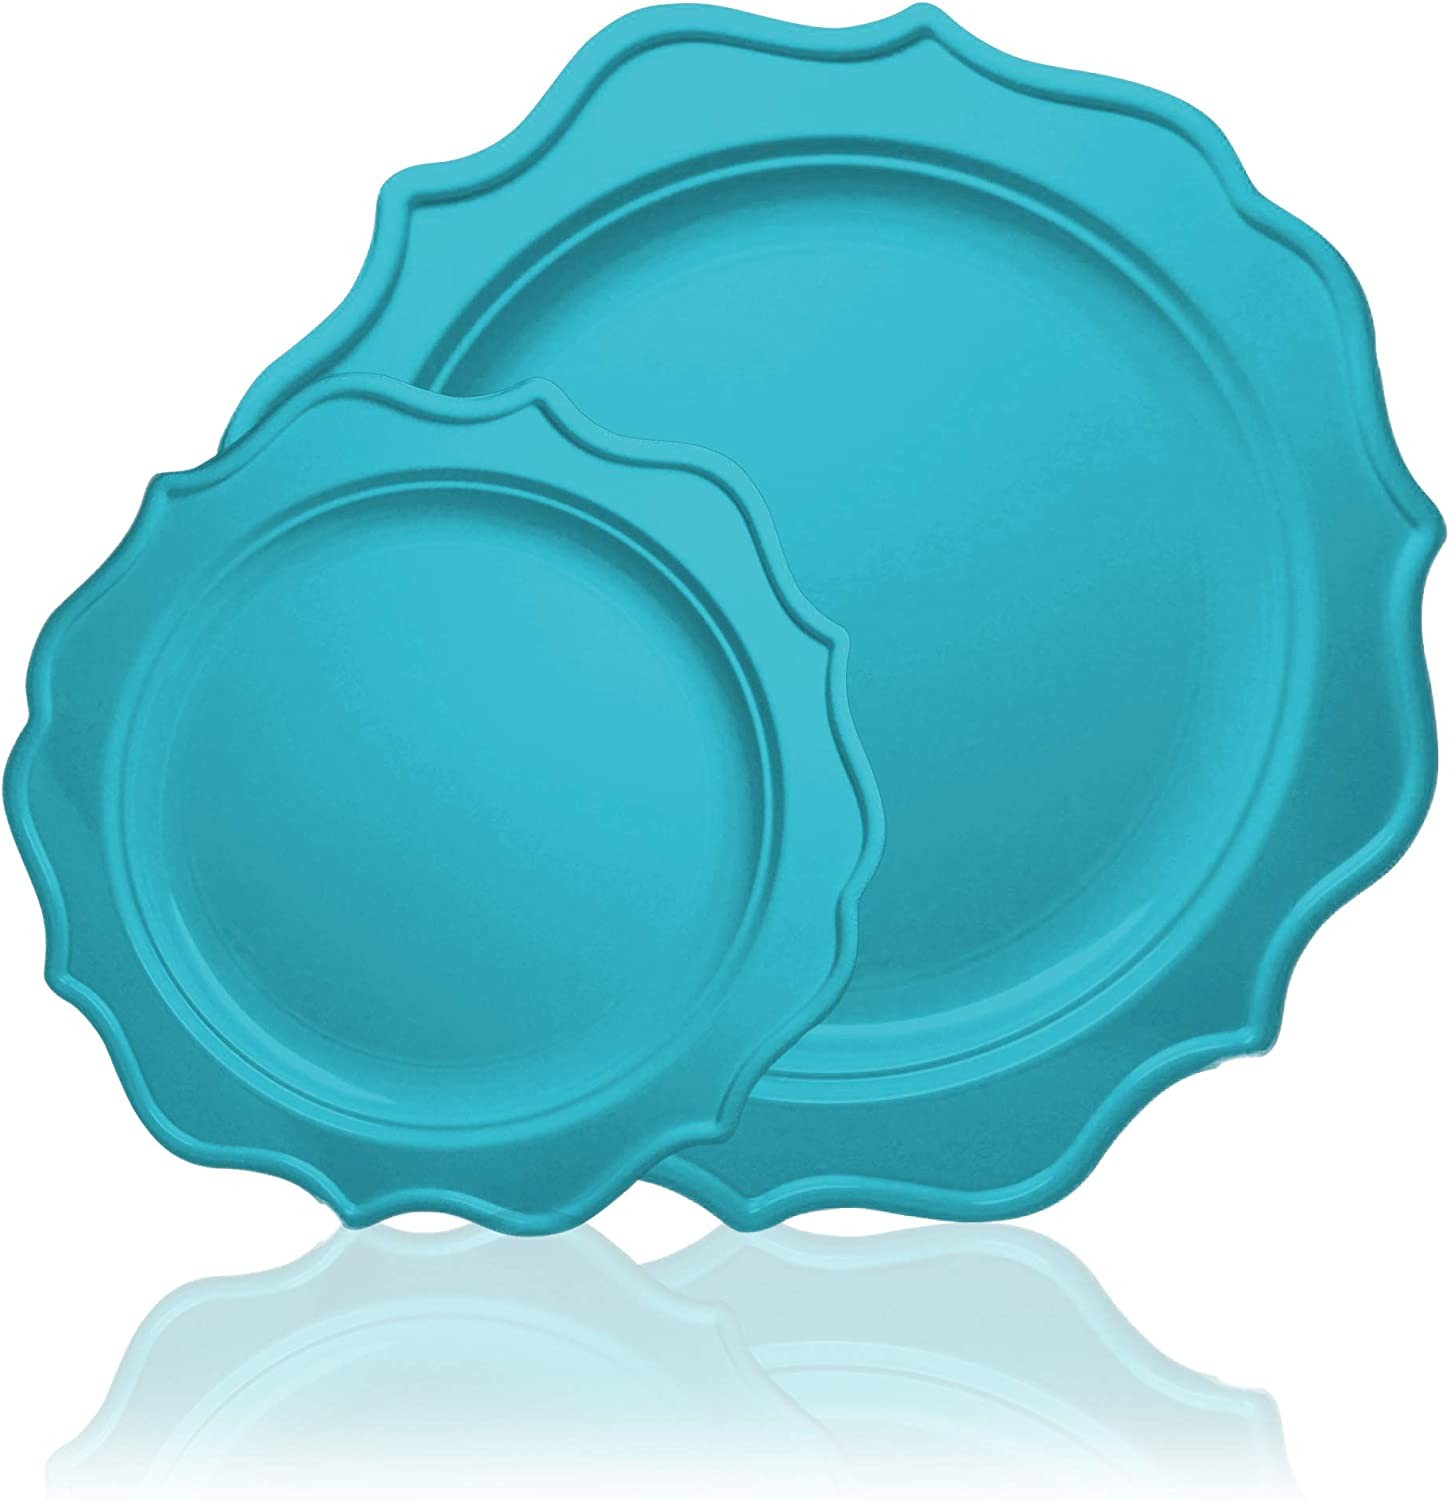 TigerChef Turquoise Scalloped Rim Disposable Plates Set, Includes 10" and 8" Plates, Service for 48